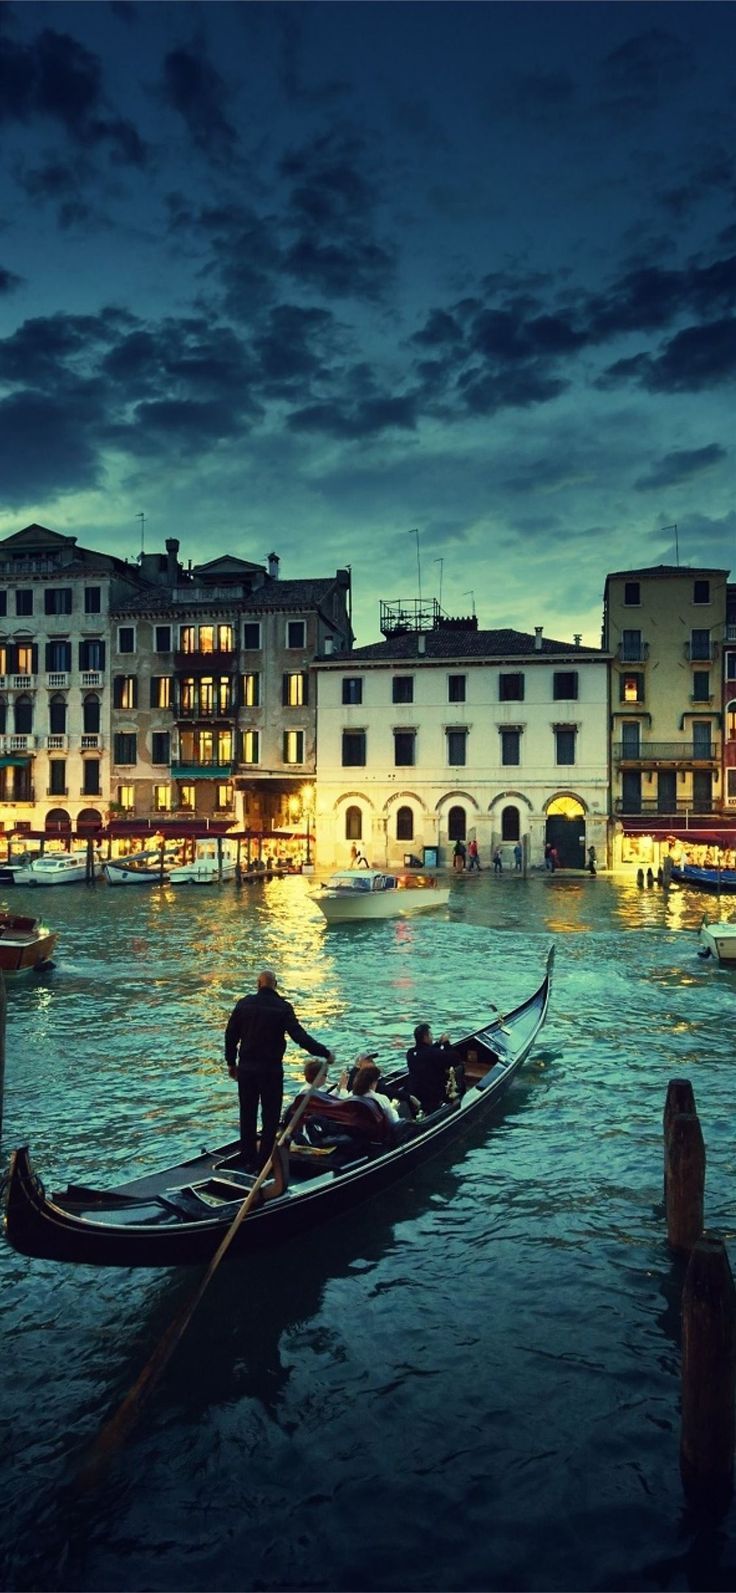 A gondola glides through the water at night in Venice, Italy. - Italy